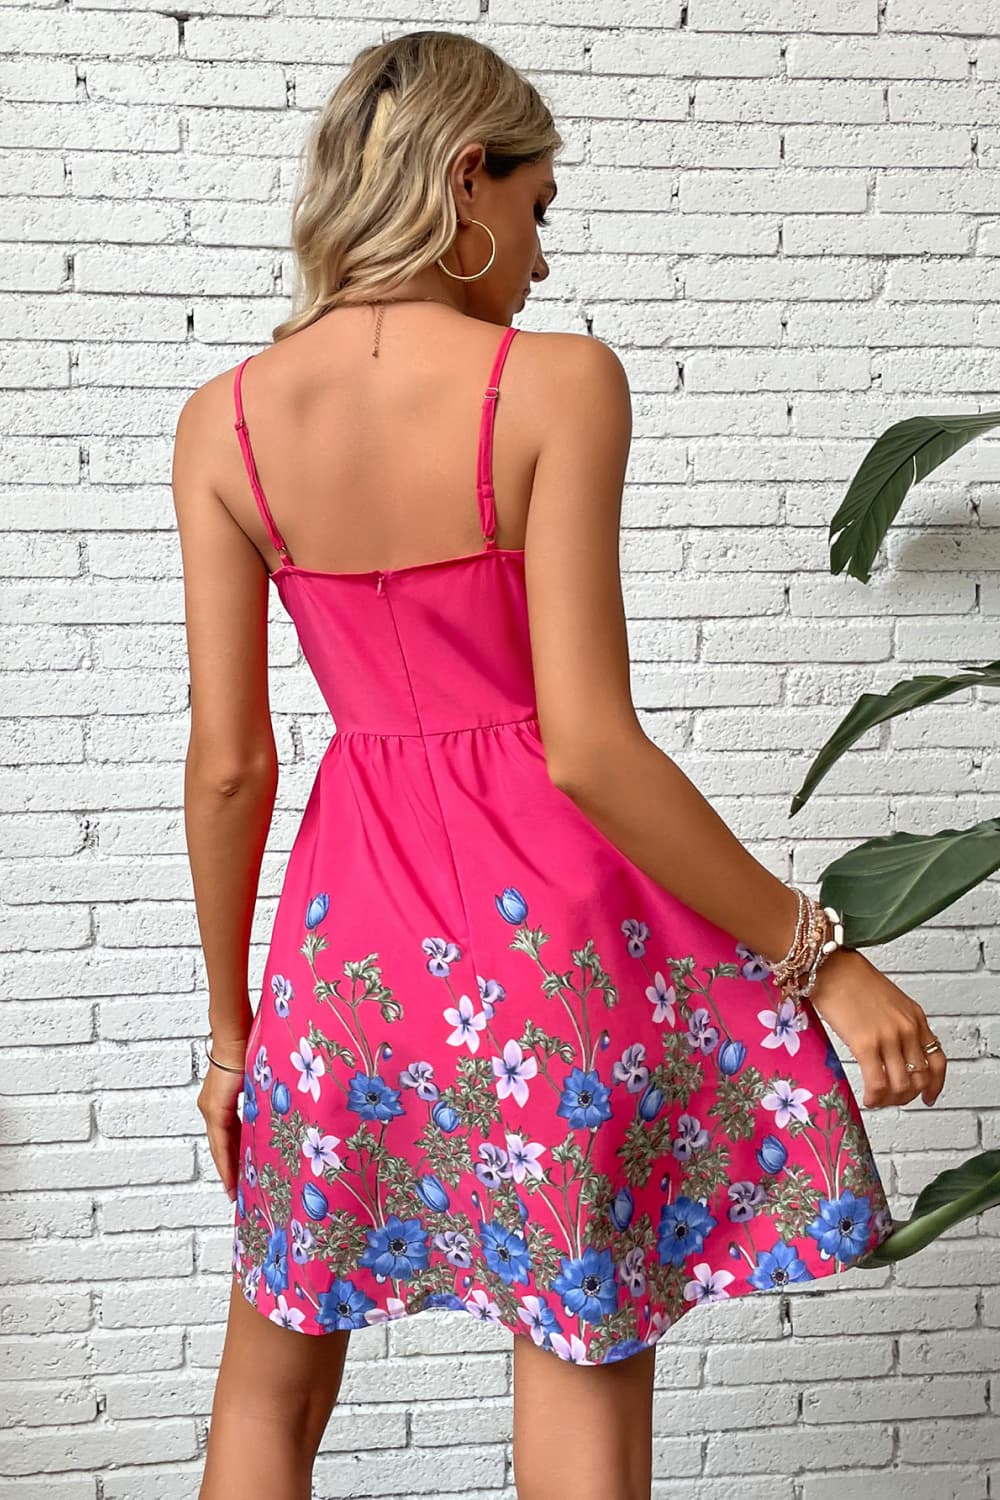 Elegant Floral Mini Dress: Perfect for Summer Beach Weddings and Special Occasions